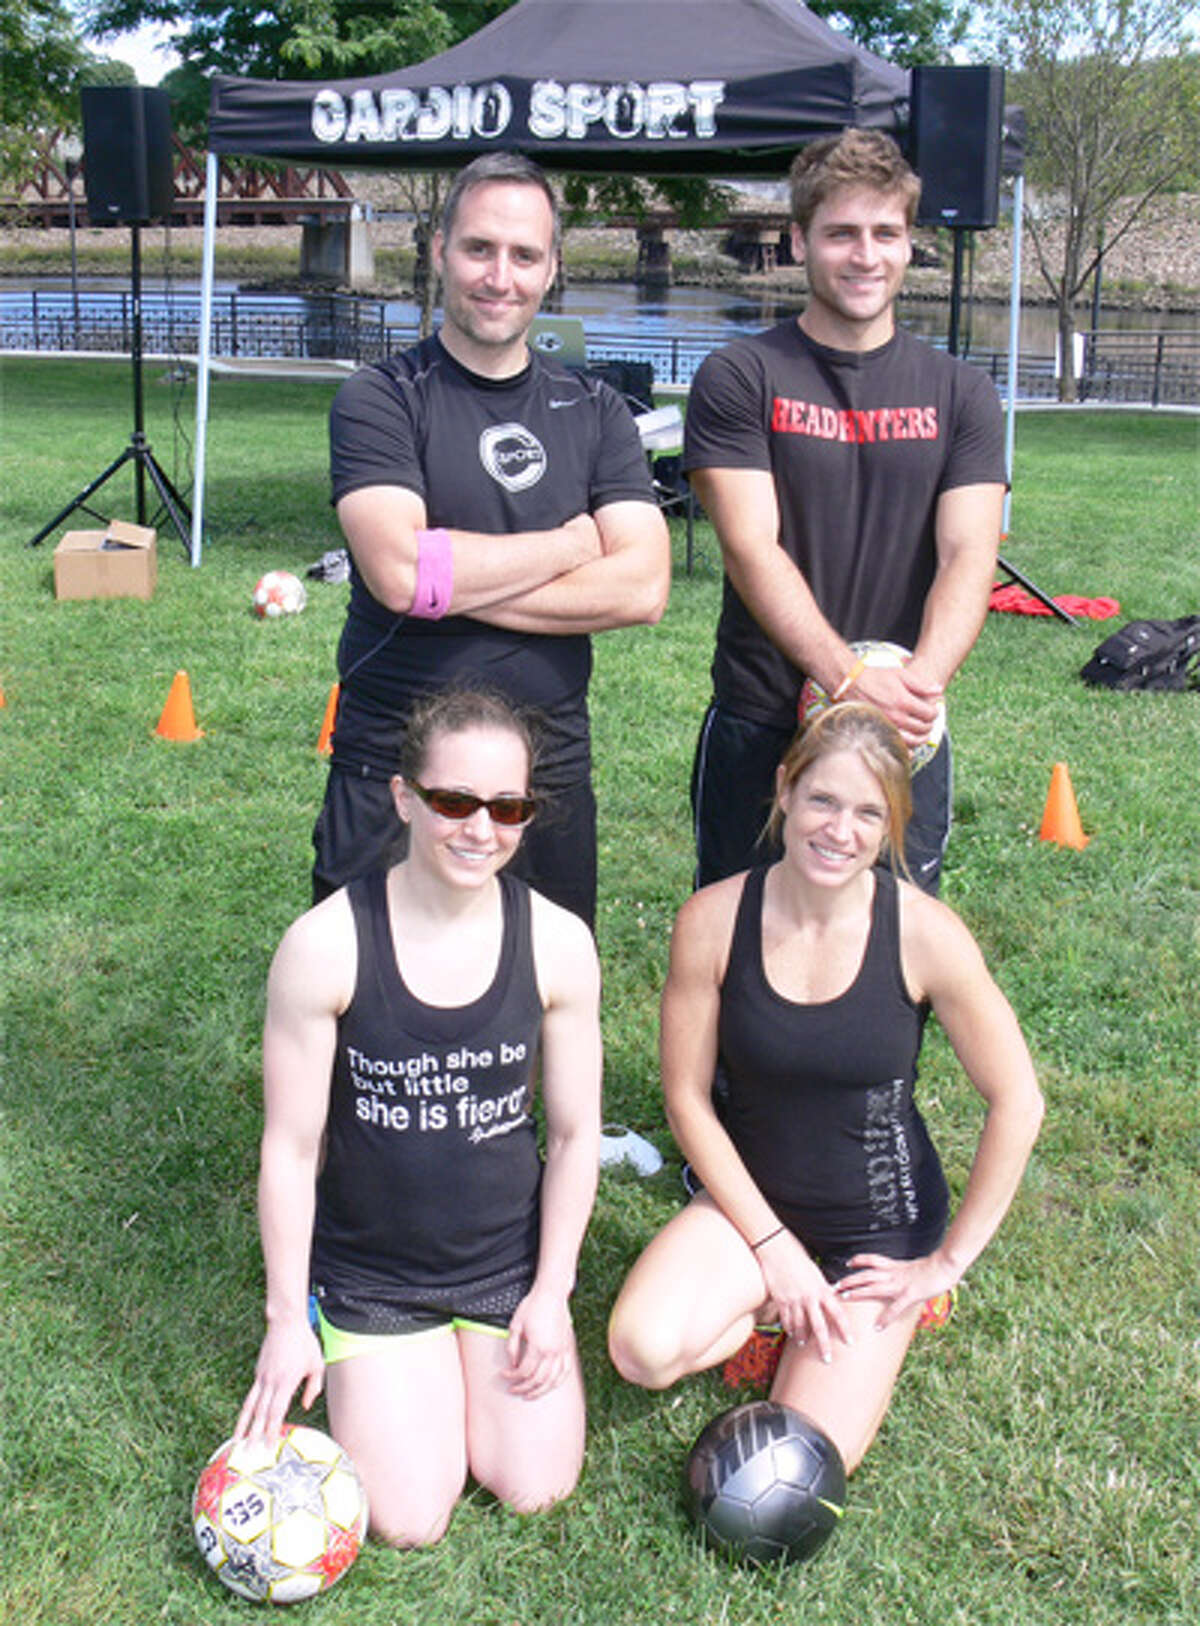 Representing CardioSport at the event were, from left, kneeling, Jacelyn Rhoads and Sharon Werth; standing, John Duffy and Shelton resident Rob Lumento. CardioSport offers sports and fitness training at B&B Batting Cages in Shelton.